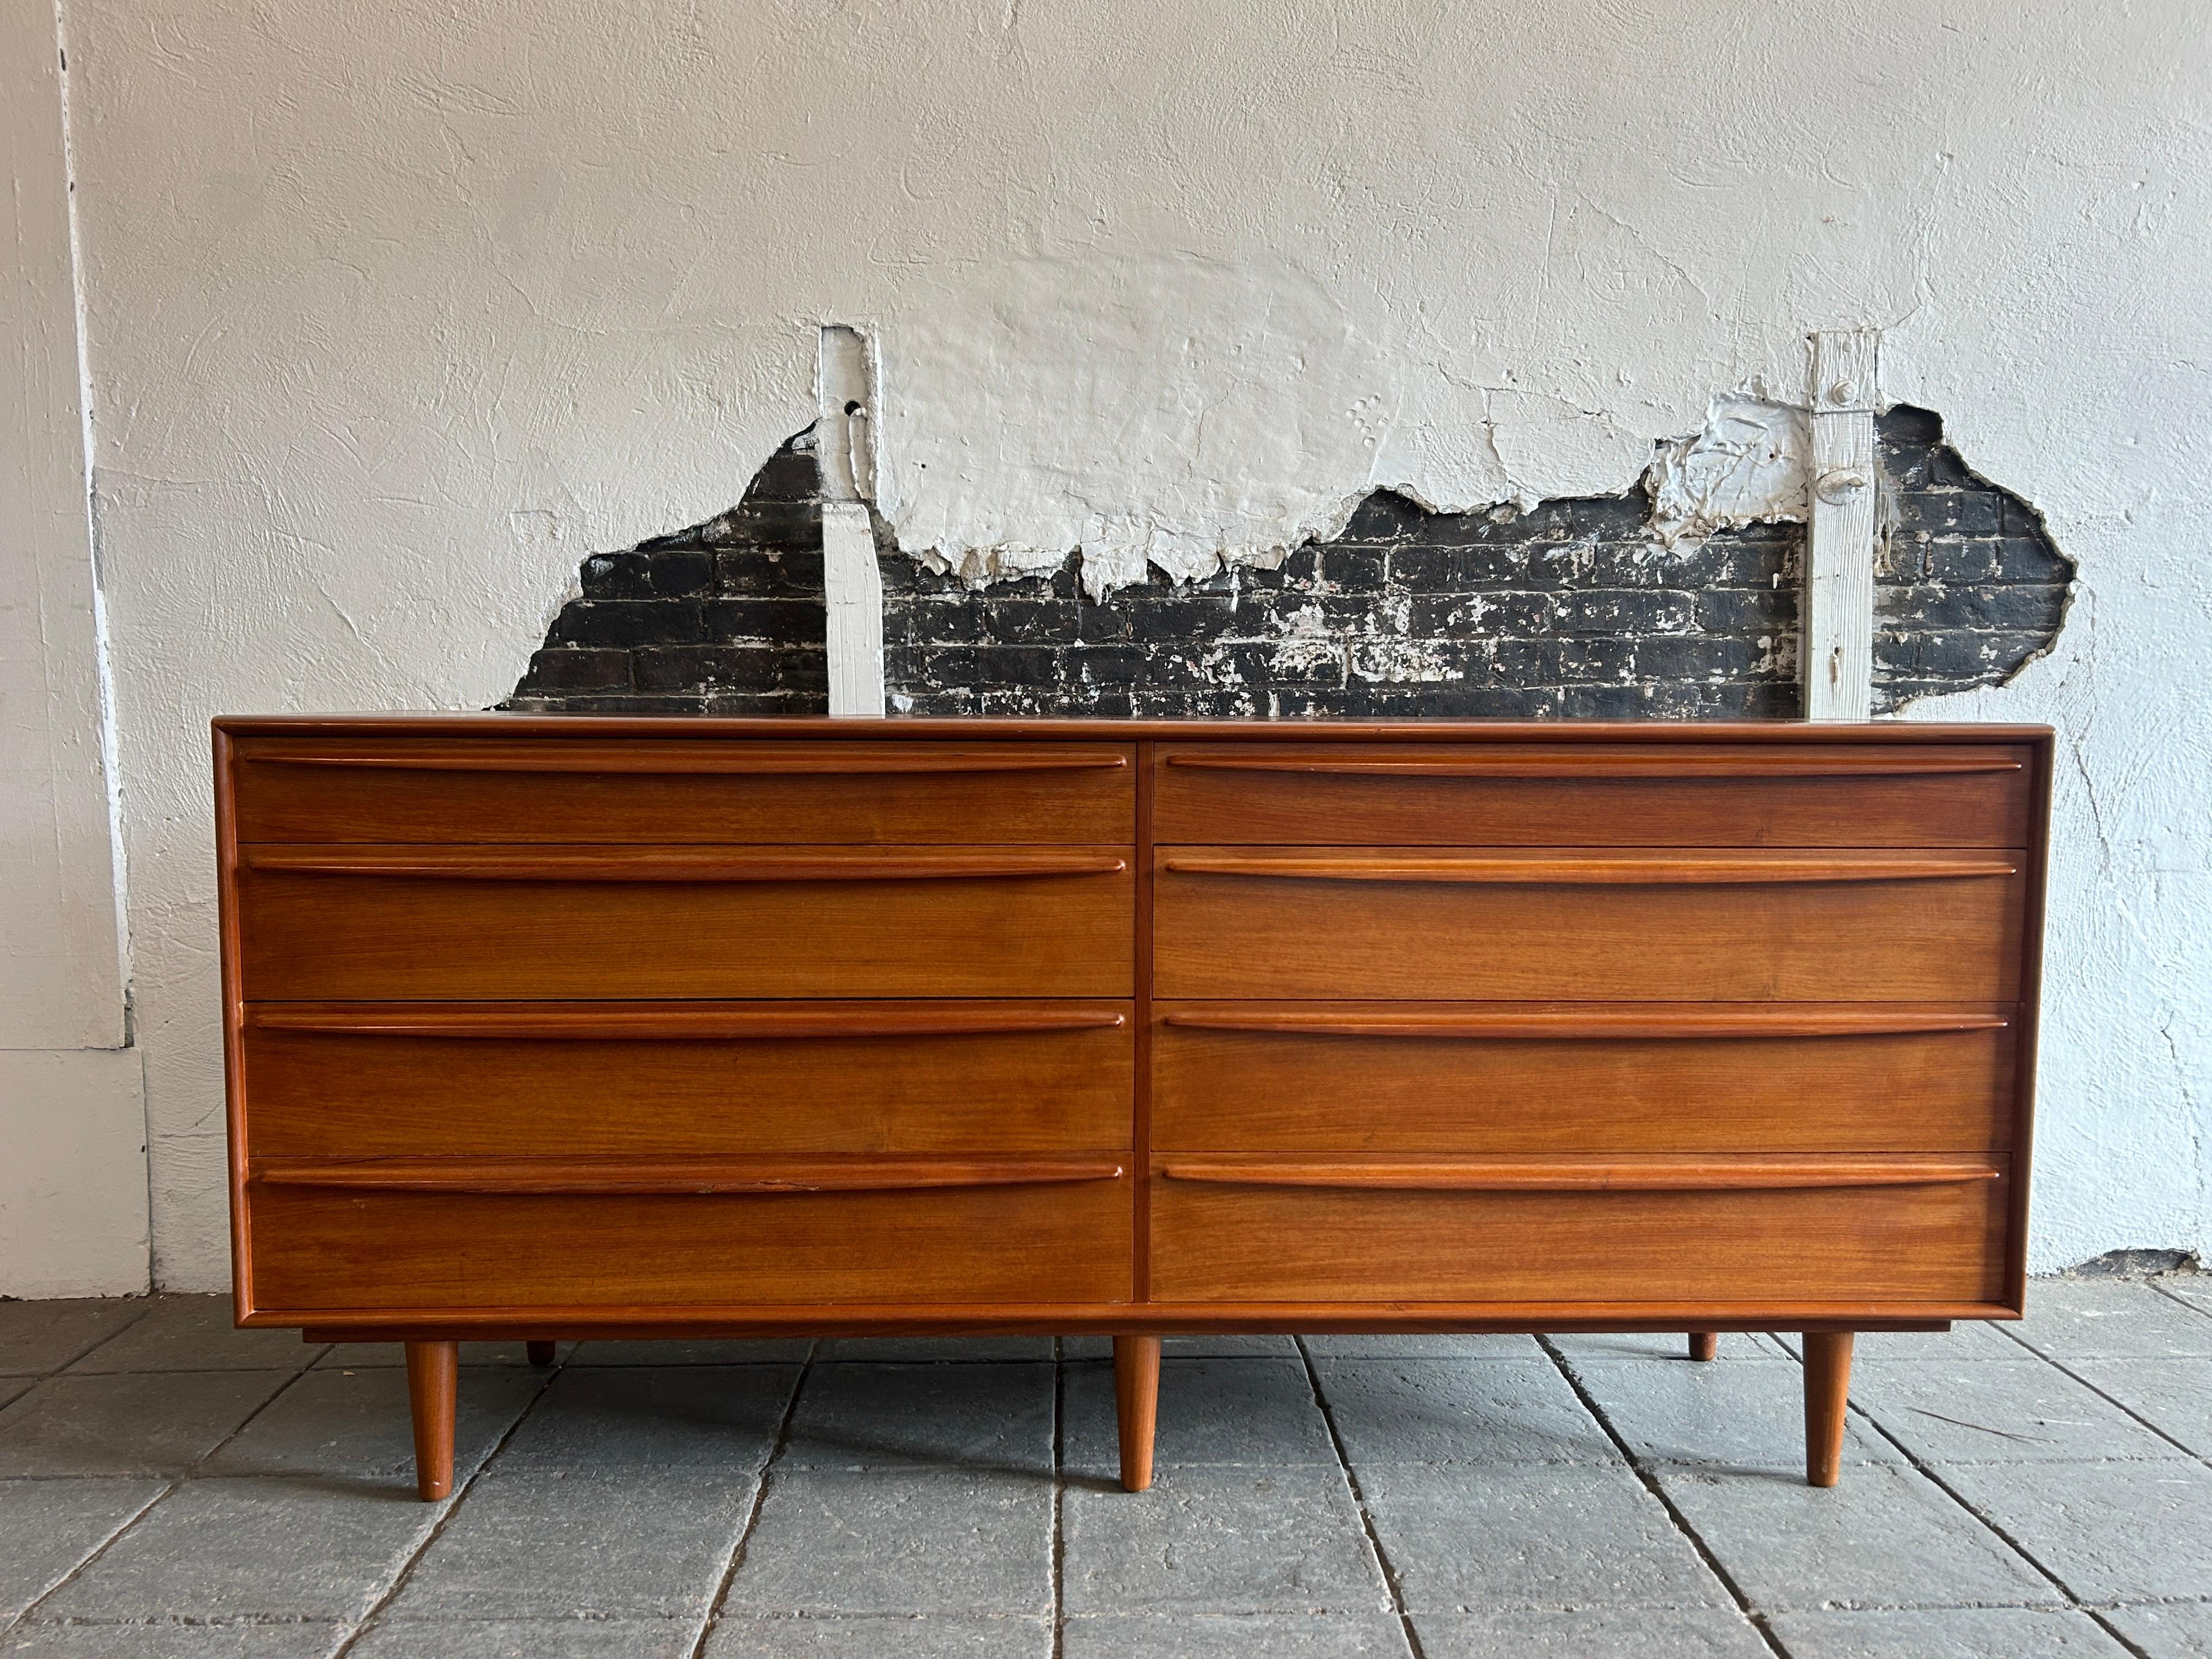 Superb Mid century danish modern teak 8 drawer dresser with sculpted handles. Beautiful Danish modern 8 drawer dresser with 8 drawer with curved rounded handles. Sits on 6 tapered wood legs. High quality Danish woodwork. All drawers slide smooth